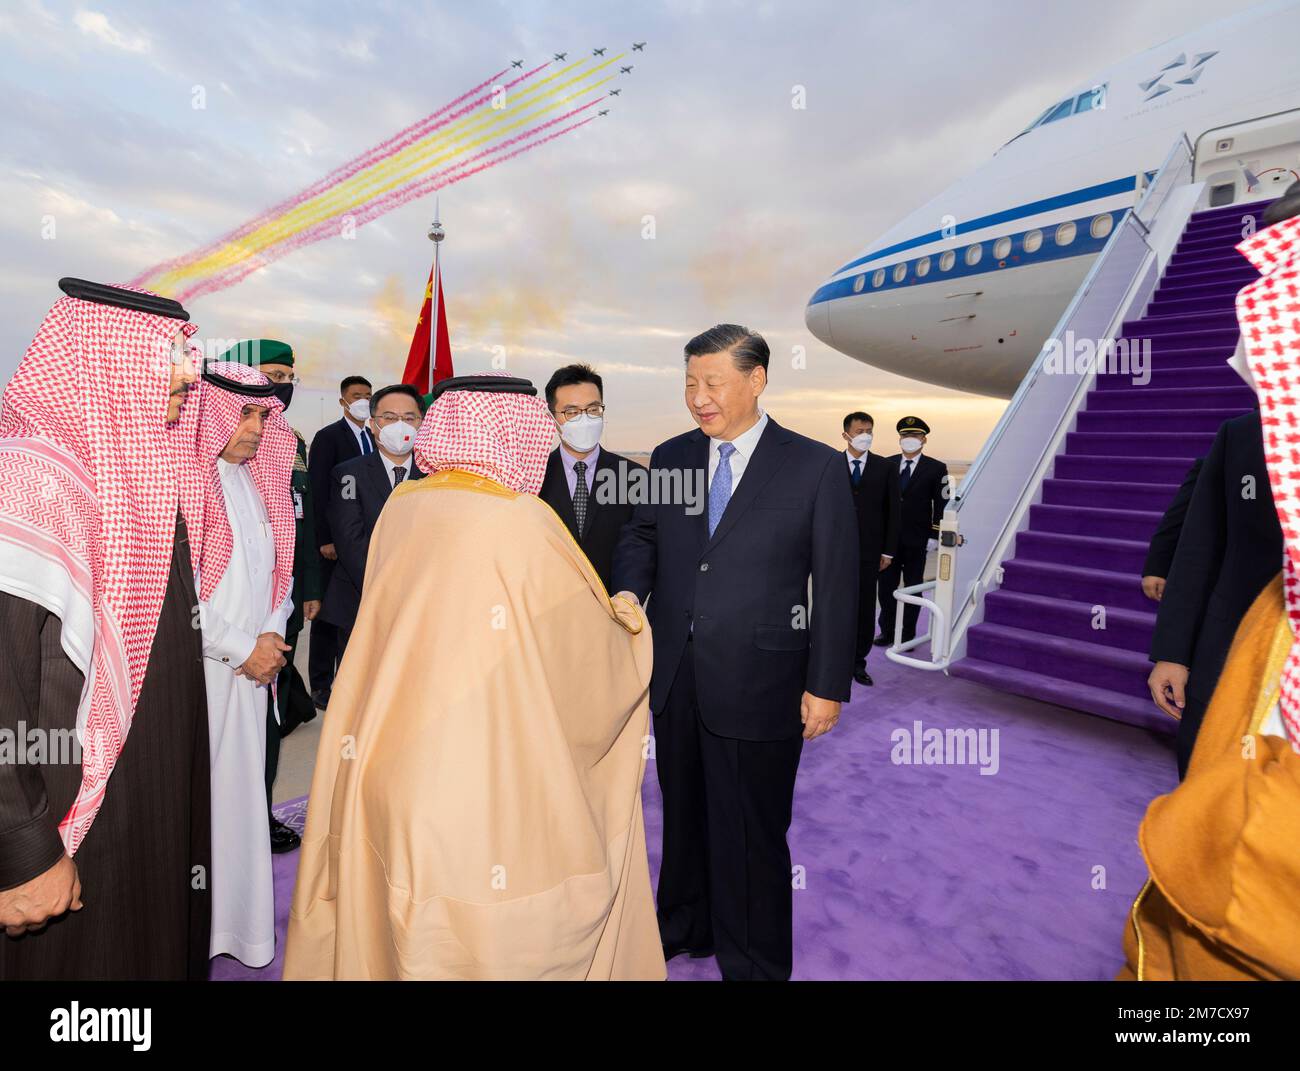 (230109) -- BEIJING, Jan. 9, 2023 (Xinhua) -- Chinese President Xi Jinping is warmly greeted upon his arrival by Governor of Riyadh Province Prince Faisal bin Bandar Al Saud, Foreign Minister Prince Faisal bin Farhan Al Saud, Minister Yasir Al-Rumayyan who works on China affairs and other key members of the royal family and senior officials of the government at the King Khalid International Airport in Riyadh, Saudi Arabia, Dec. 7, 2022. Xi arrived here on Dec. 7, 2022 to attend the first China-Arab States Summit and the China-Gulf Cooperation Council (GCC) Summit, and pay a state visit to Saud Stock Photo